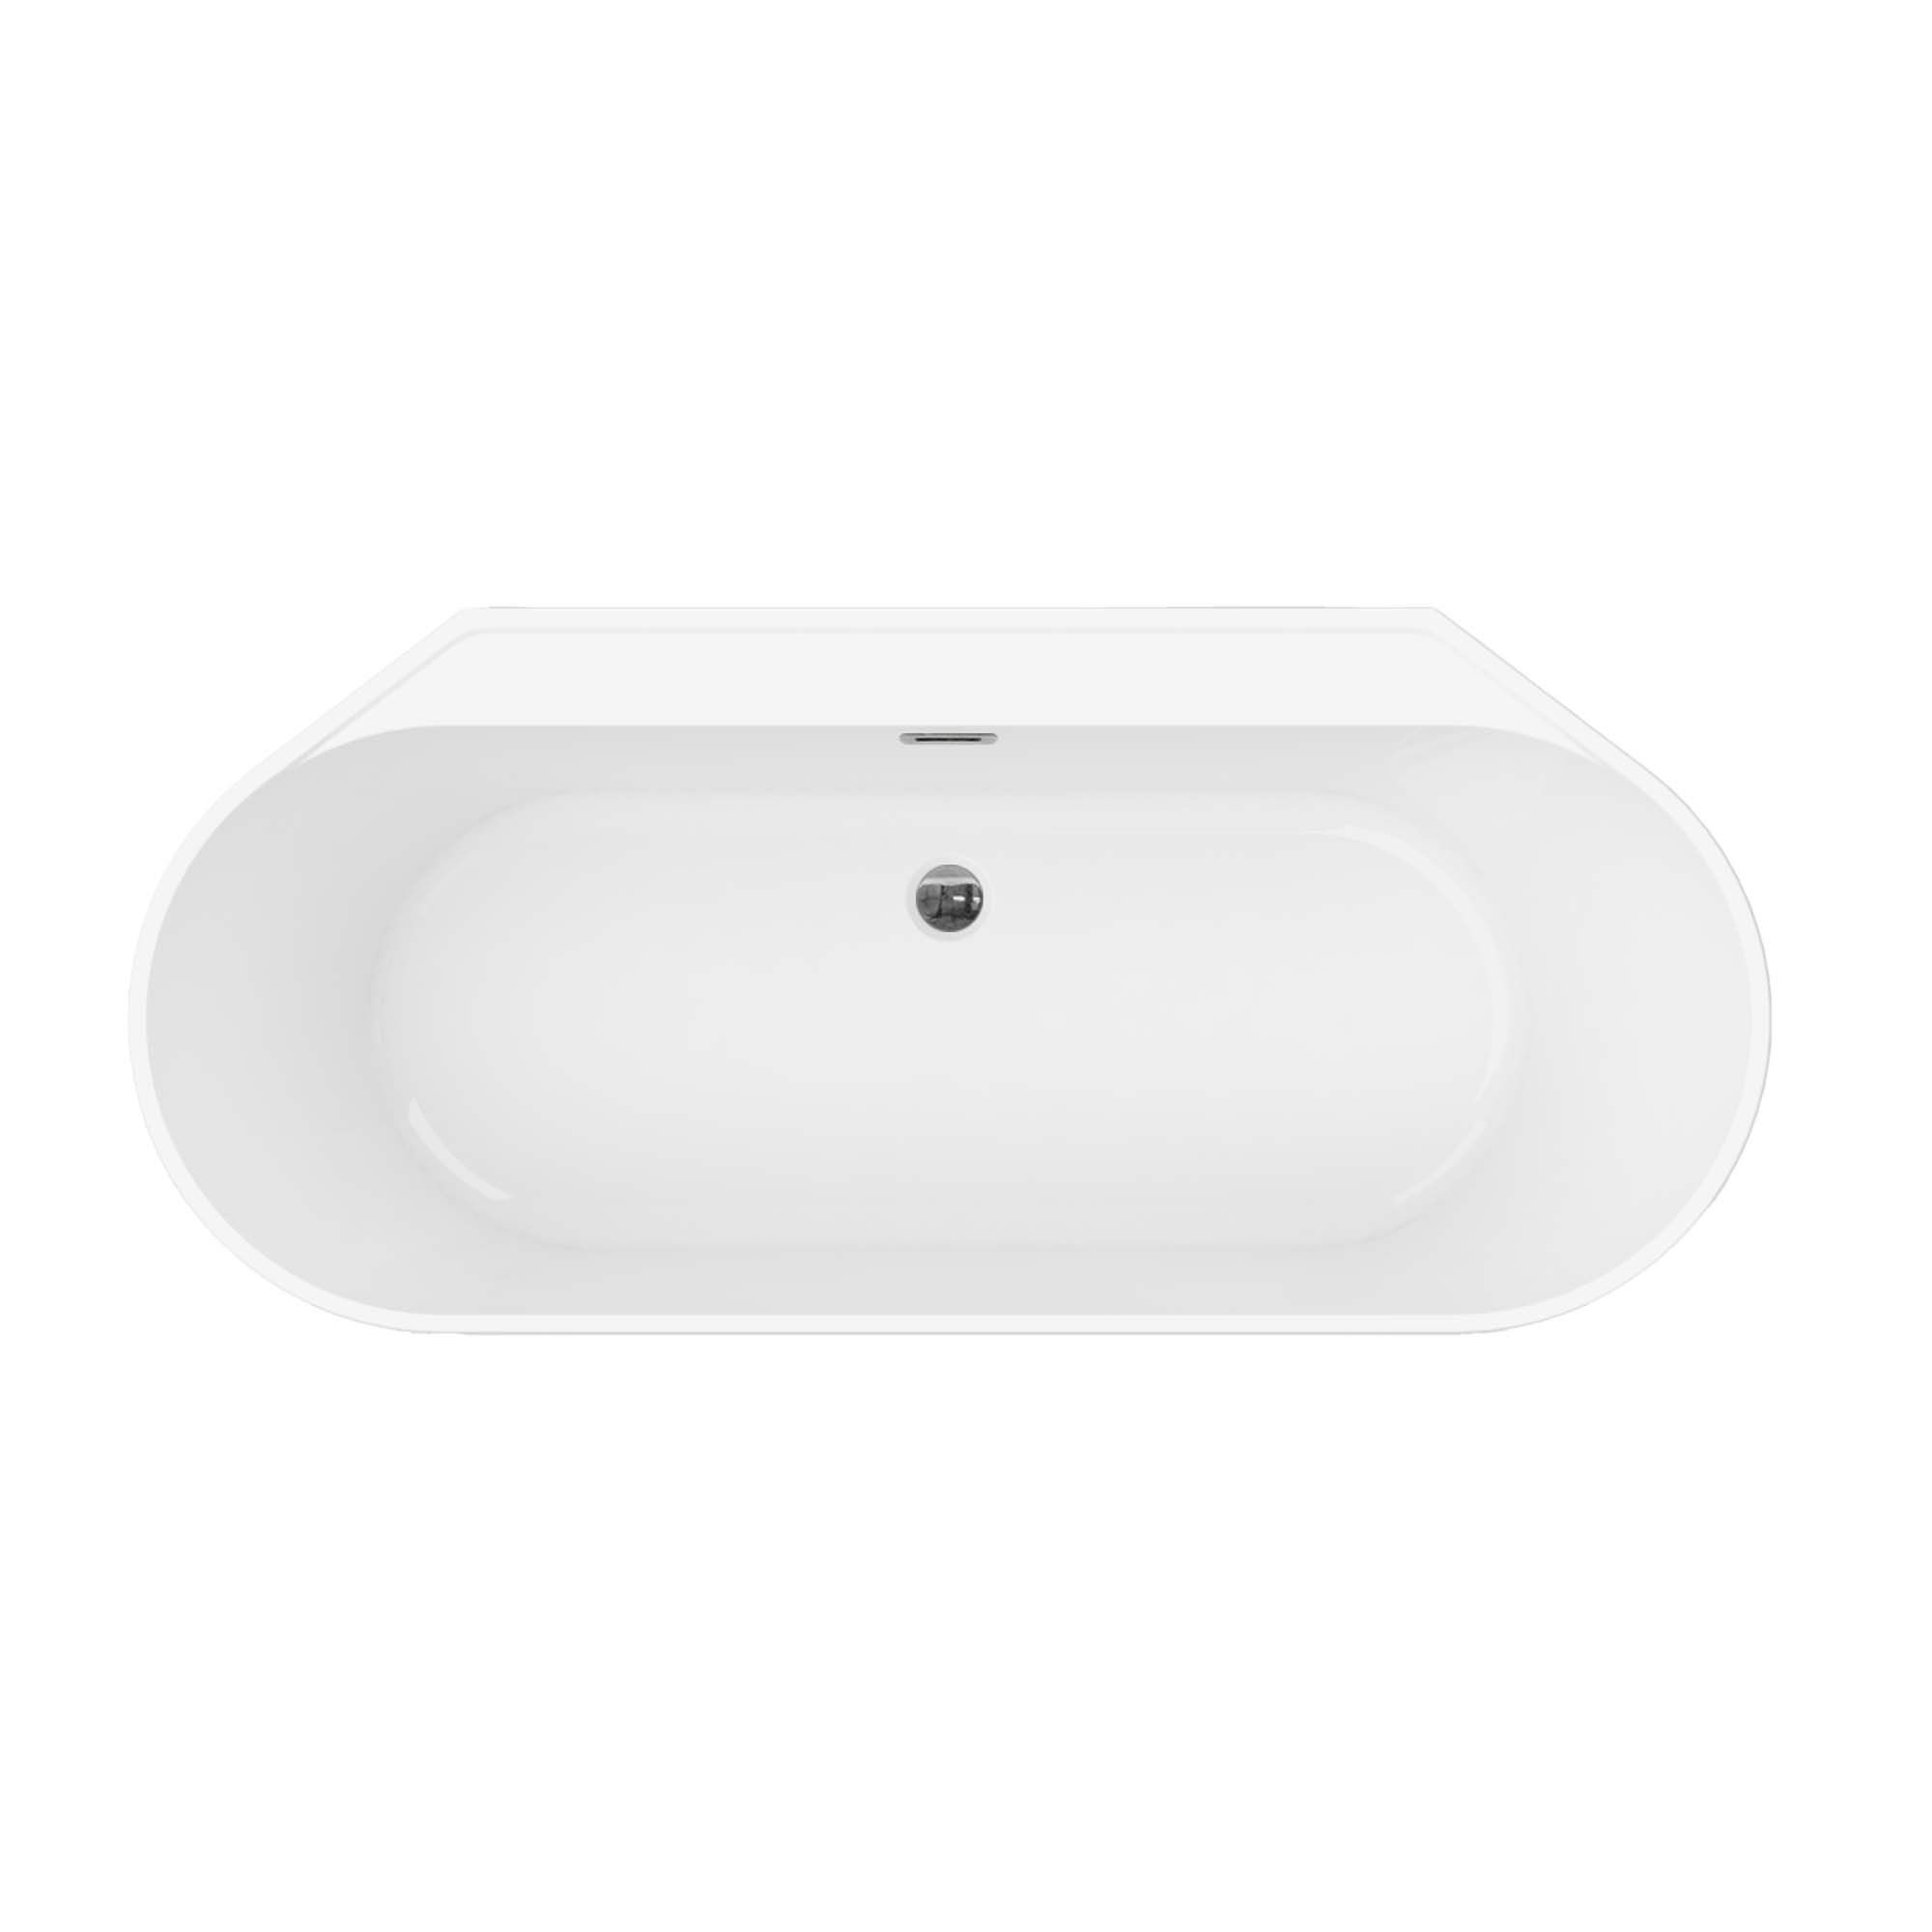 GoodHome Nakina Gloss White Acrylic Back to wall D-shaped Double ended Bath (L)1800mm (W)800mm